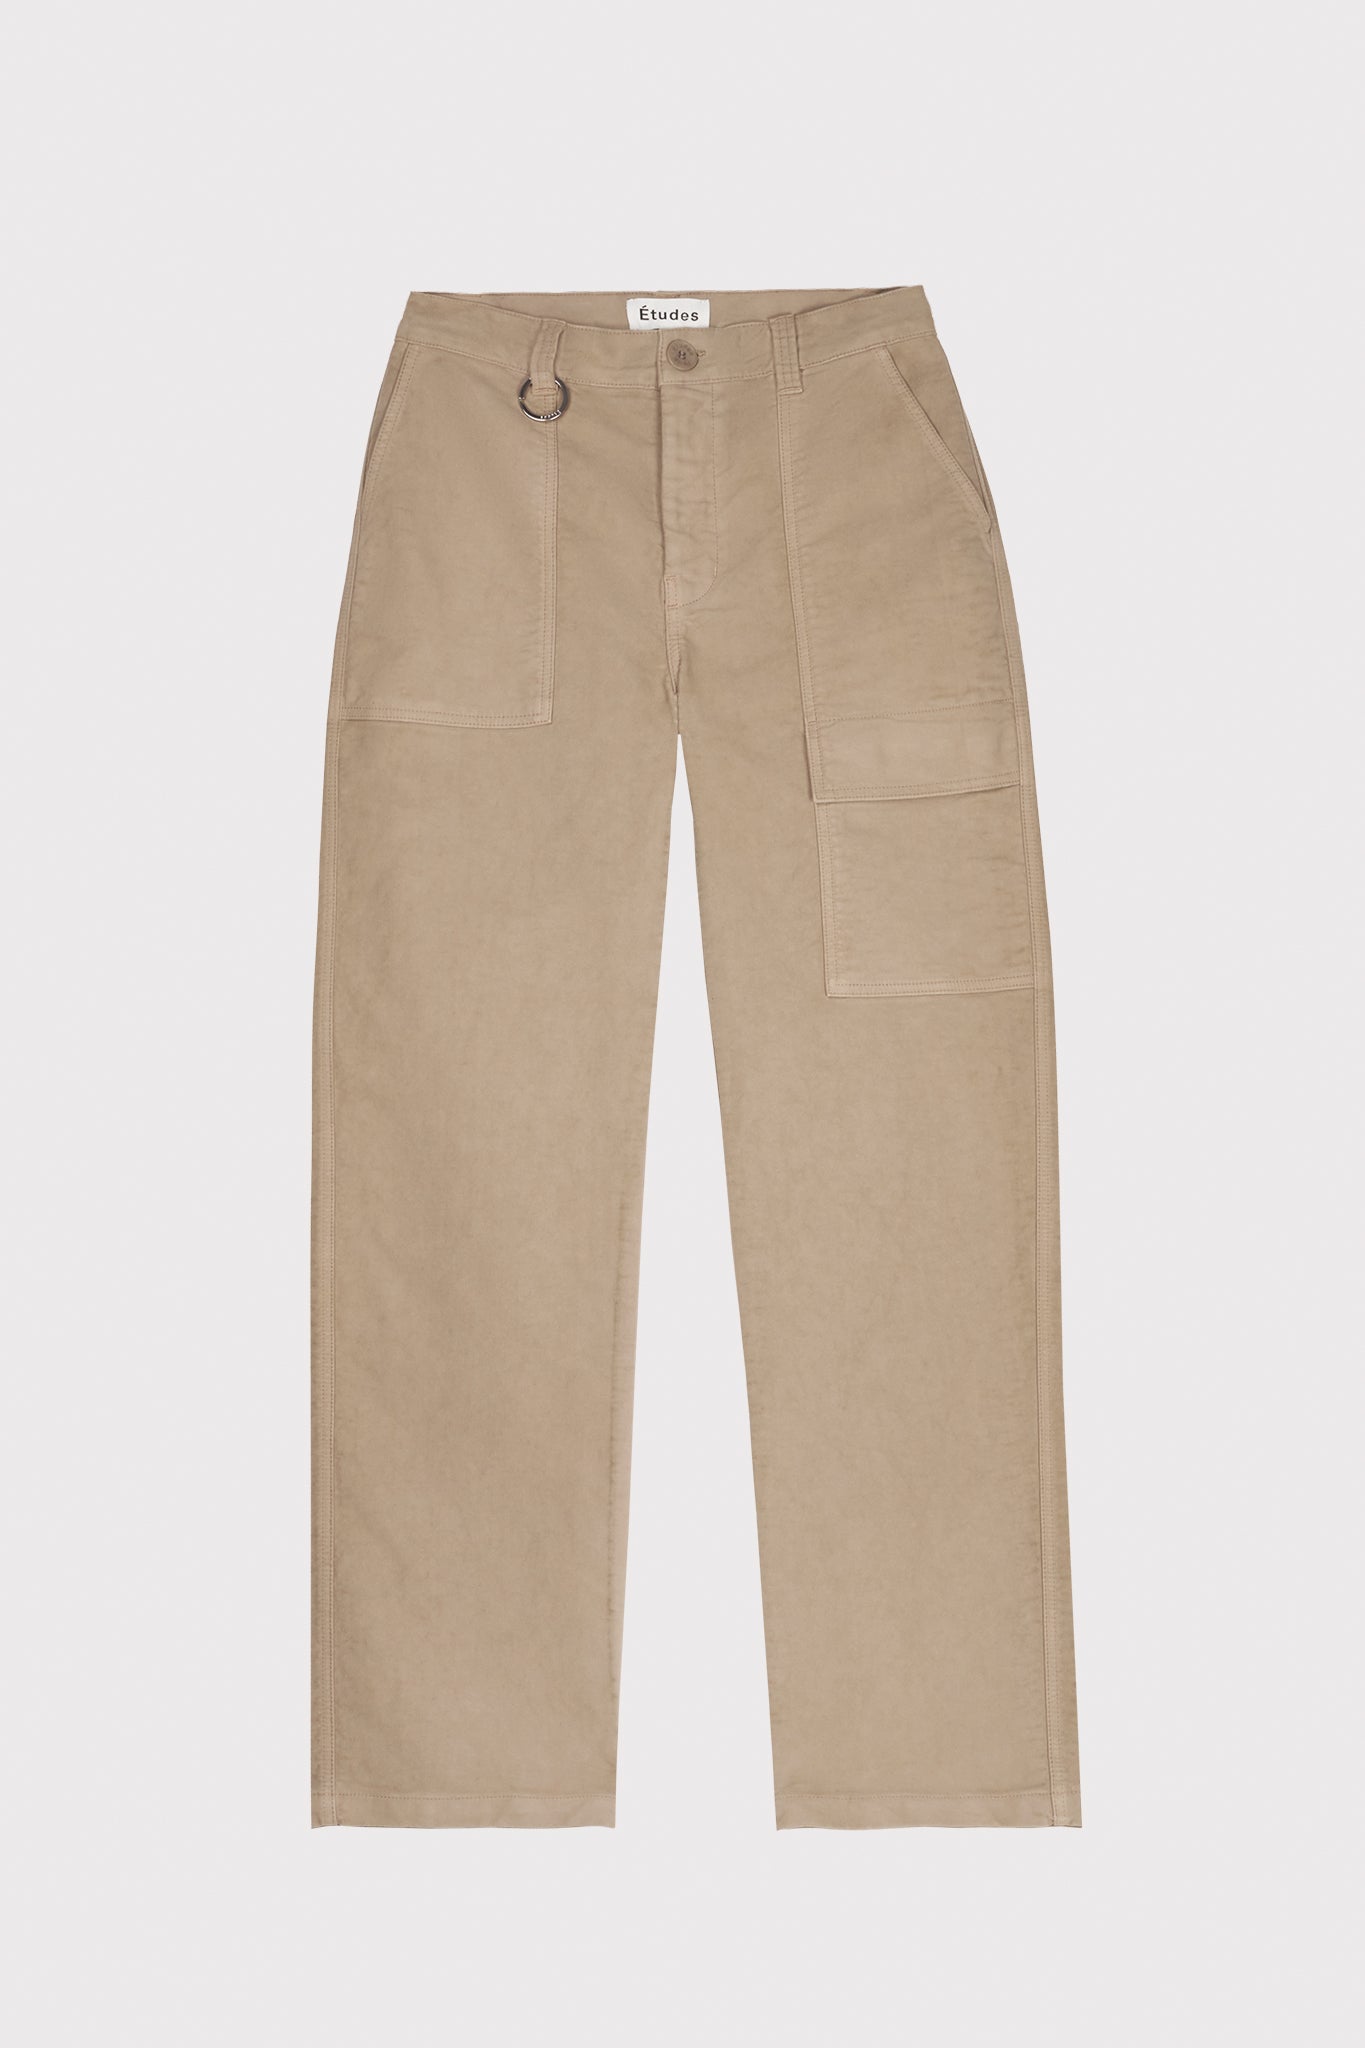 ÉTUDES GRAVURE TWILL DYED SAND USED TROUSERS 2